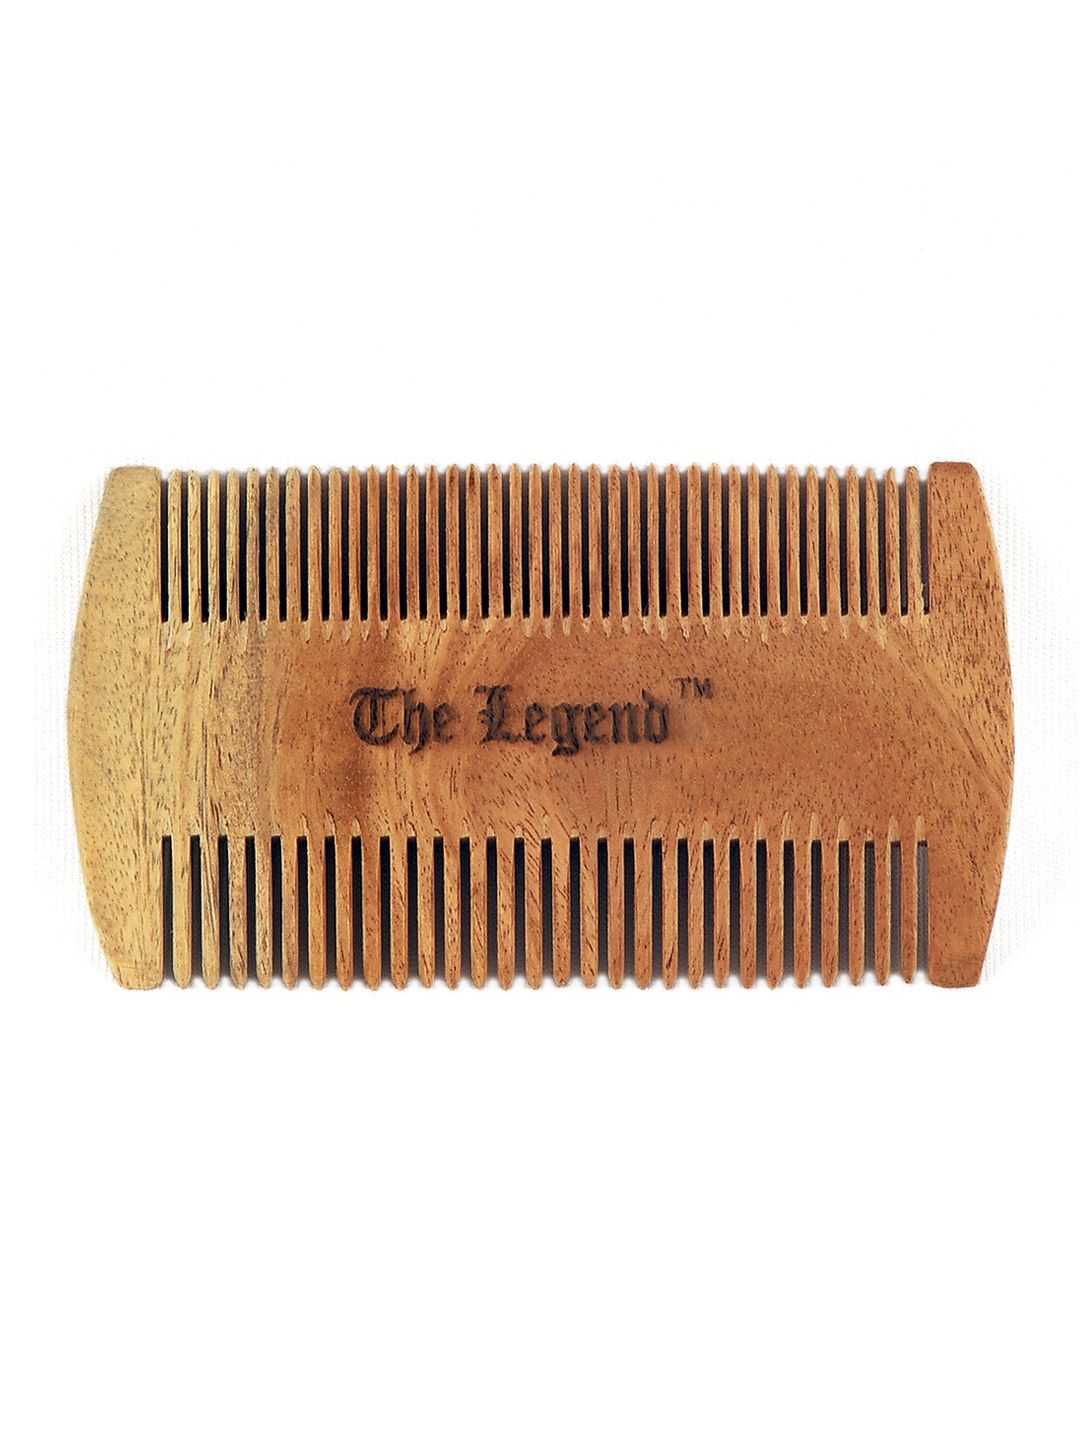 The Legend Organic Neem Wood Comb for Beard and Moustache Price in India